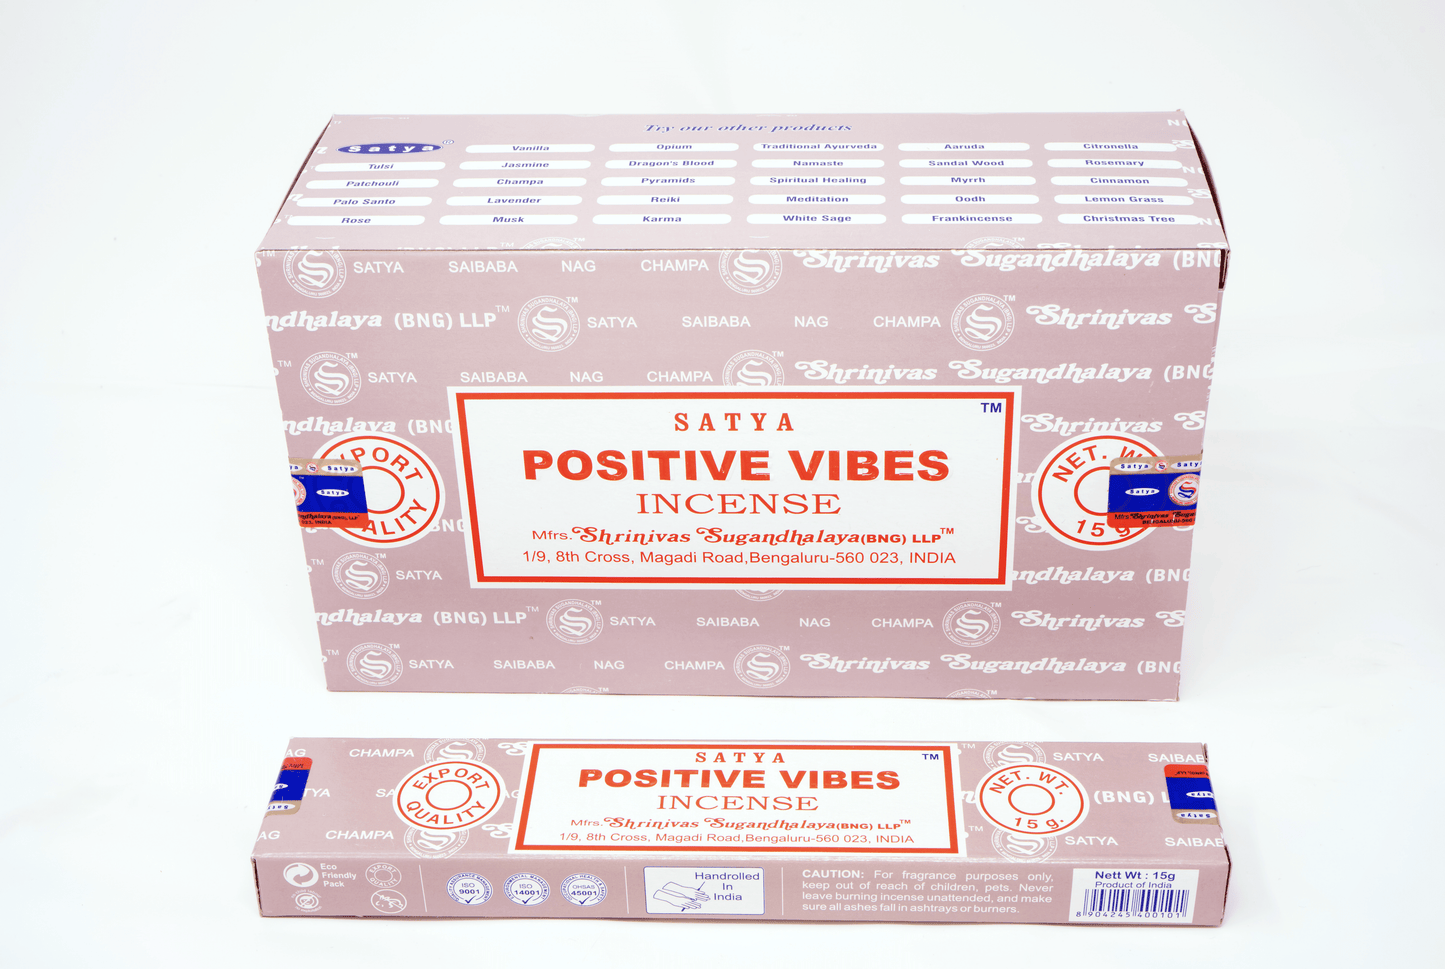 Positive Vibes Incense Aromatherapy